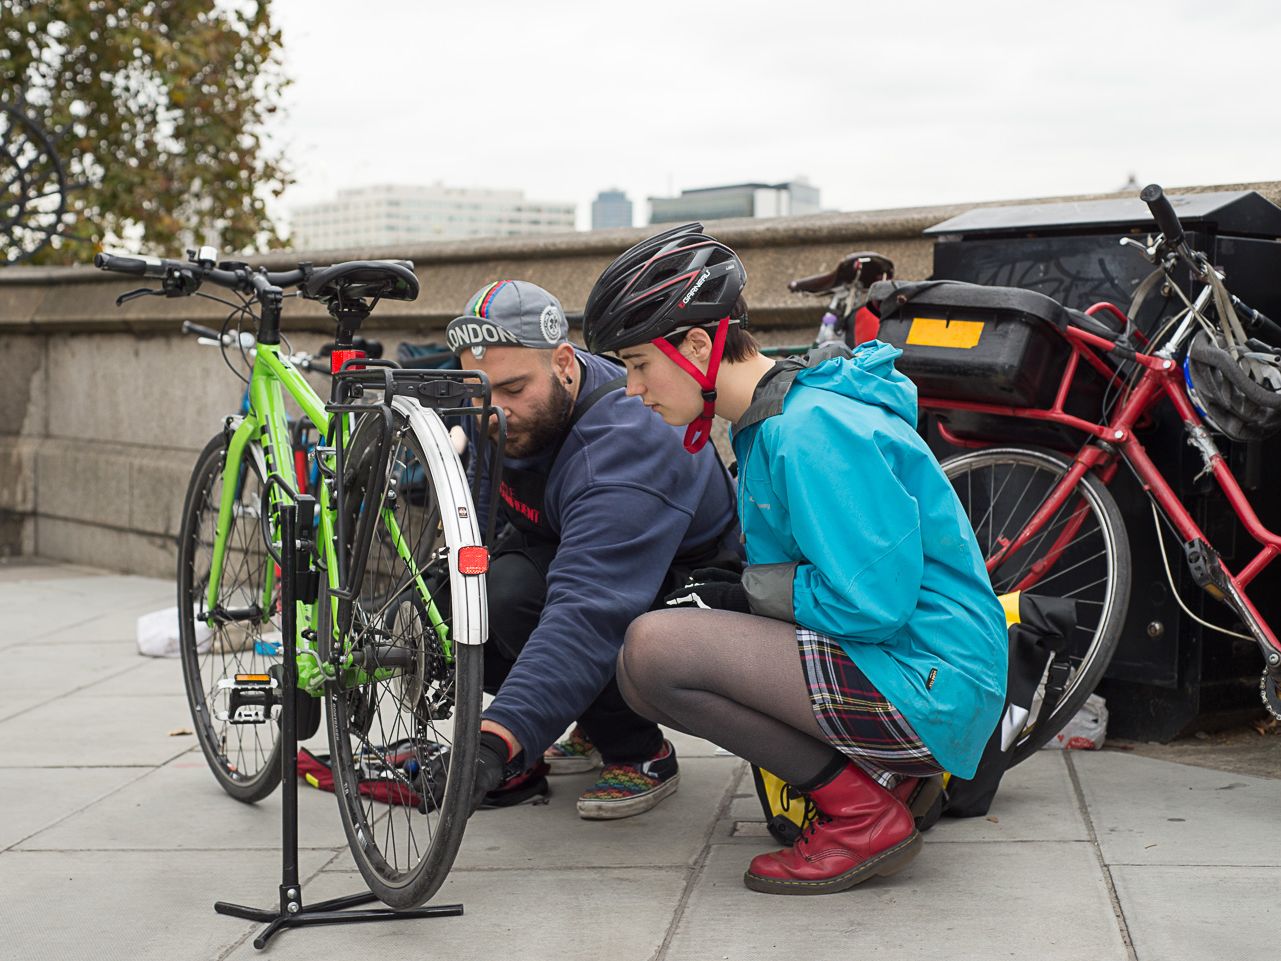 A mechanic helps a young student repair their bike on the pavement of Lambeth Bridge in London. The student is wearing a helmet and listening intently.